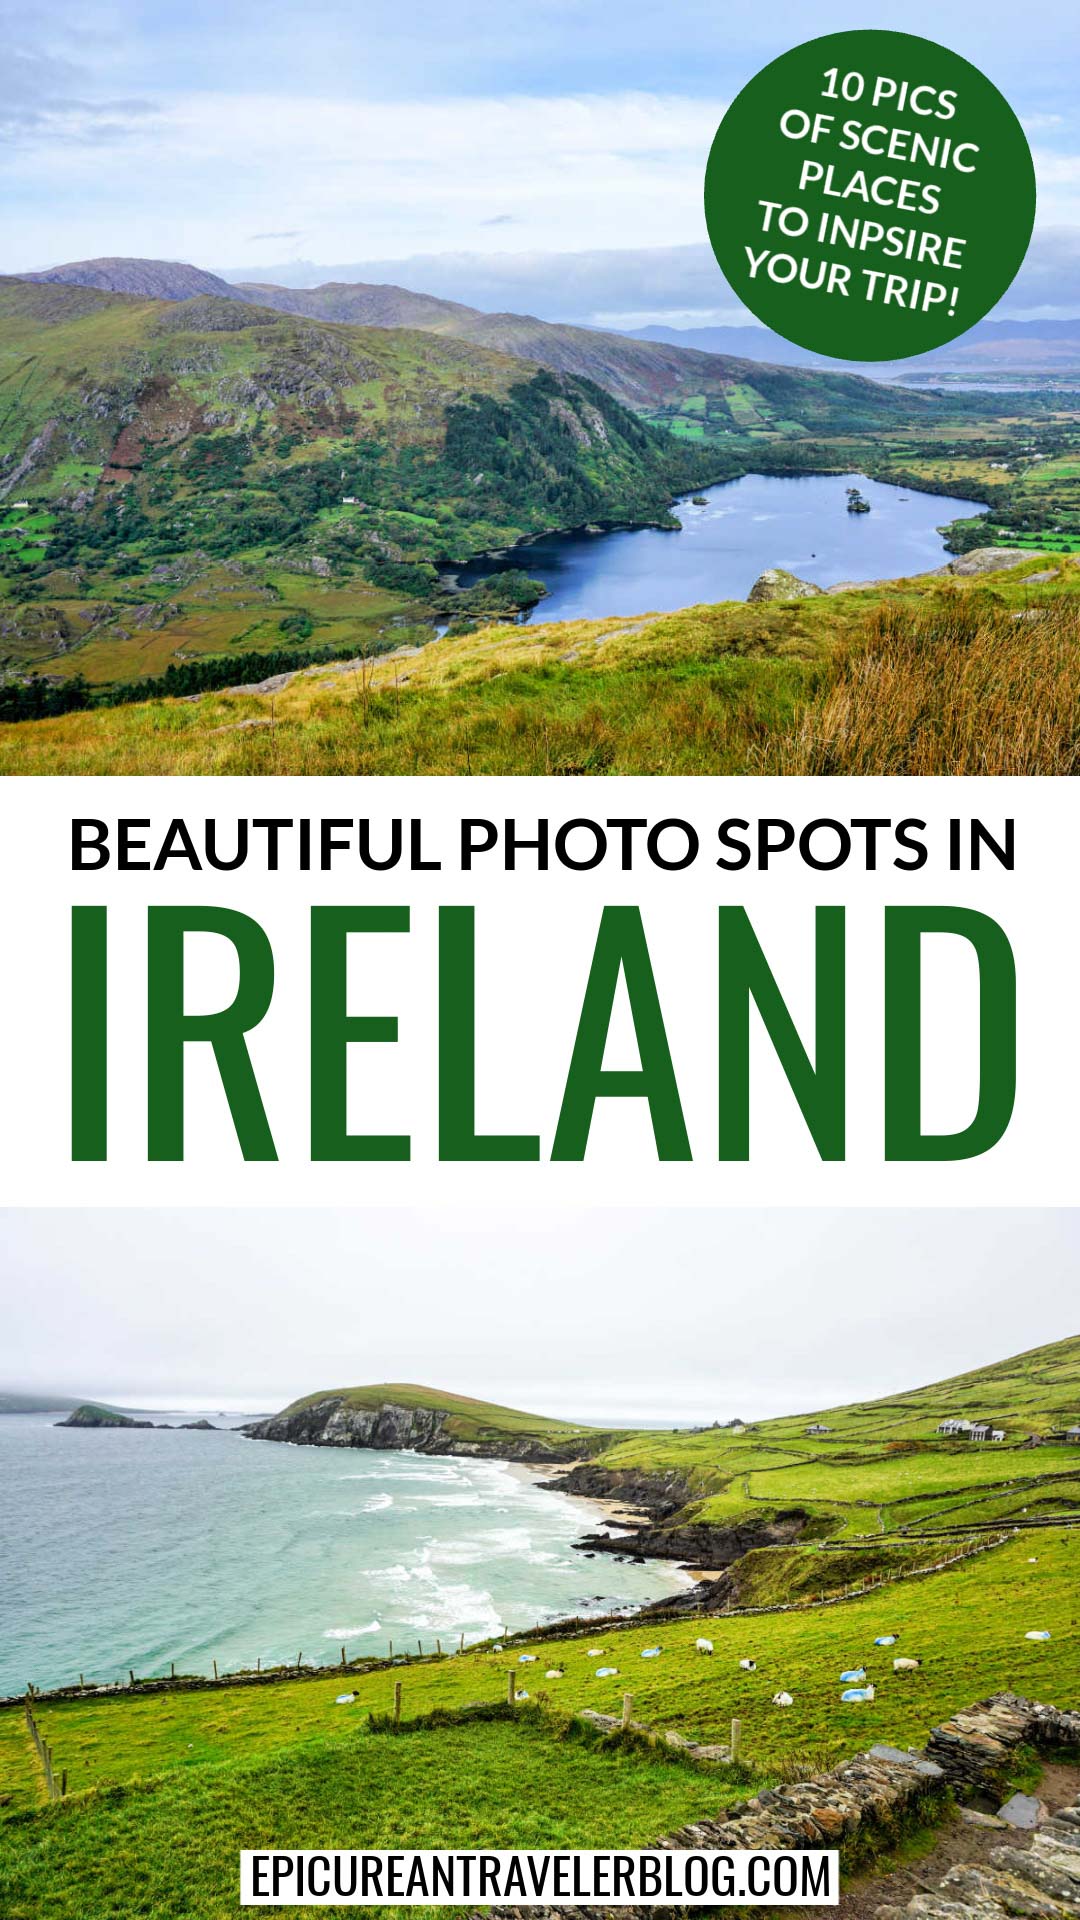 Beautiful photo spots in Ireland with 10 pics of scenic places to inspire your trip